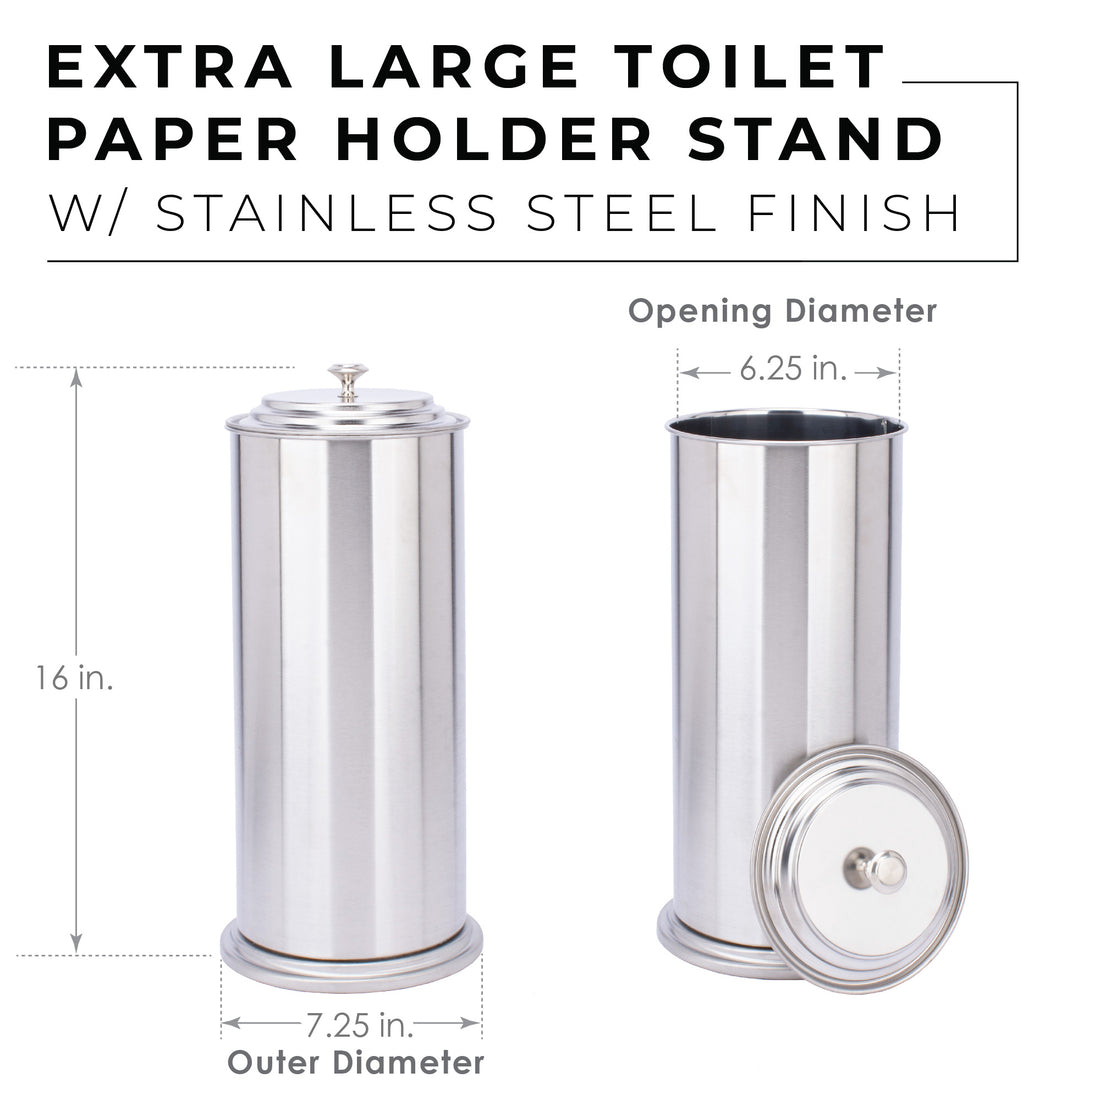 Freestanding Extra Large Toilet Paper Holder  (Stainless Steel Finish) - Utility-Sink.com